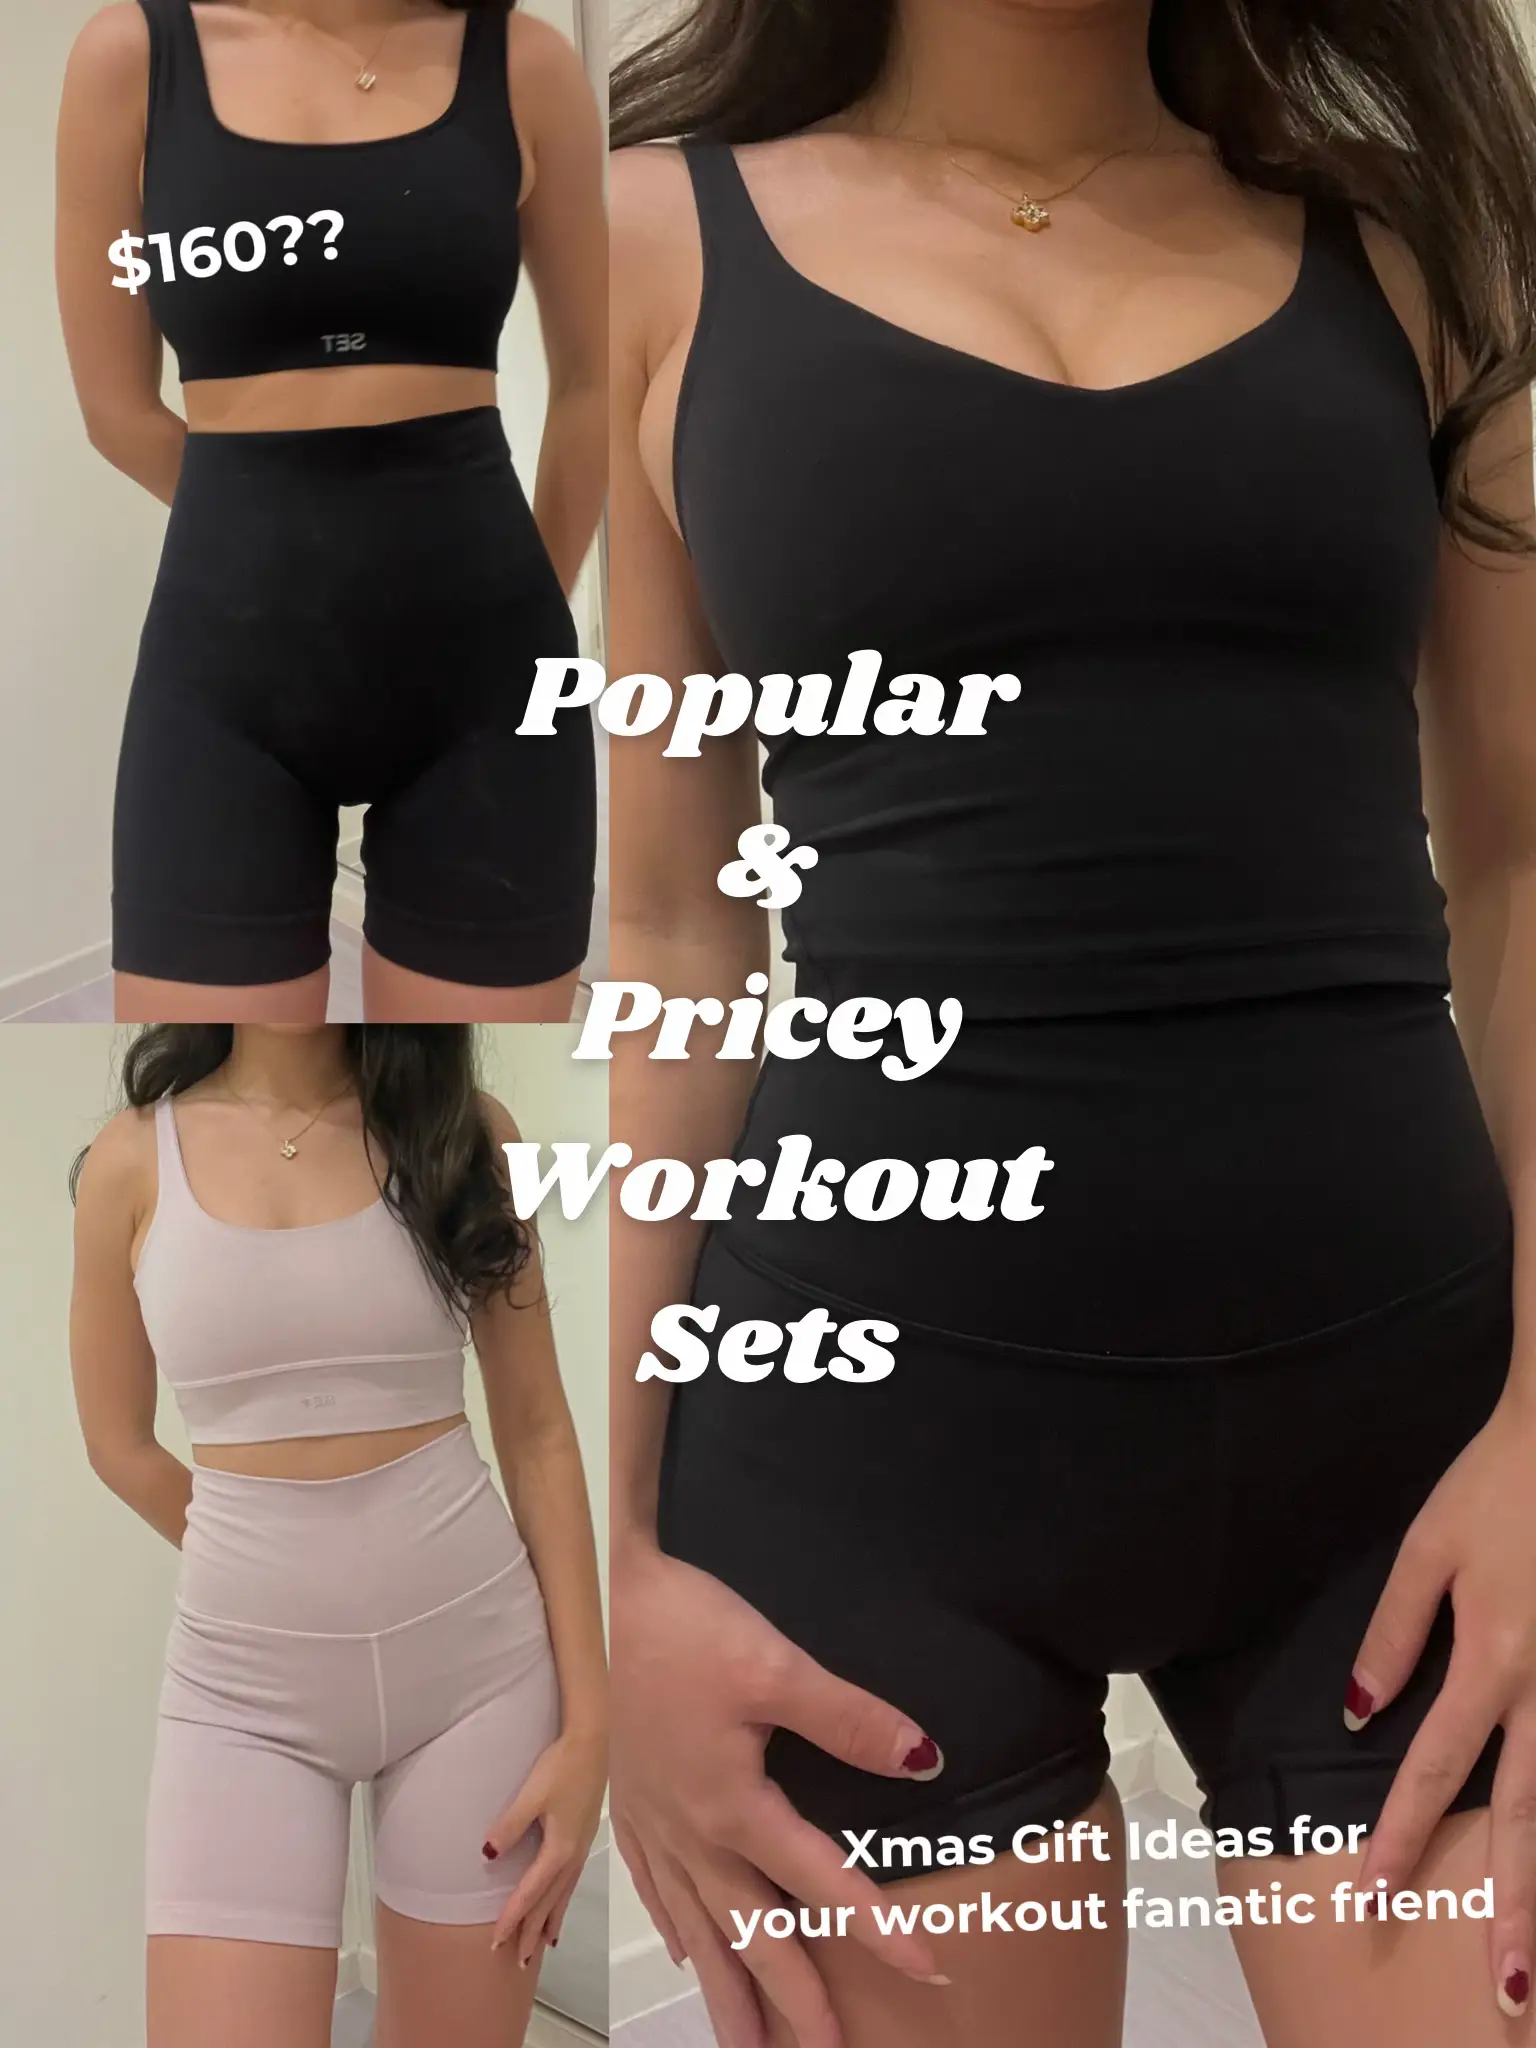 VIRAL TIKTOK LULULEMON DUPES FROM ! FRACTION OF THE PRICE & SO SOFT!   FASHION FINDS 2022 